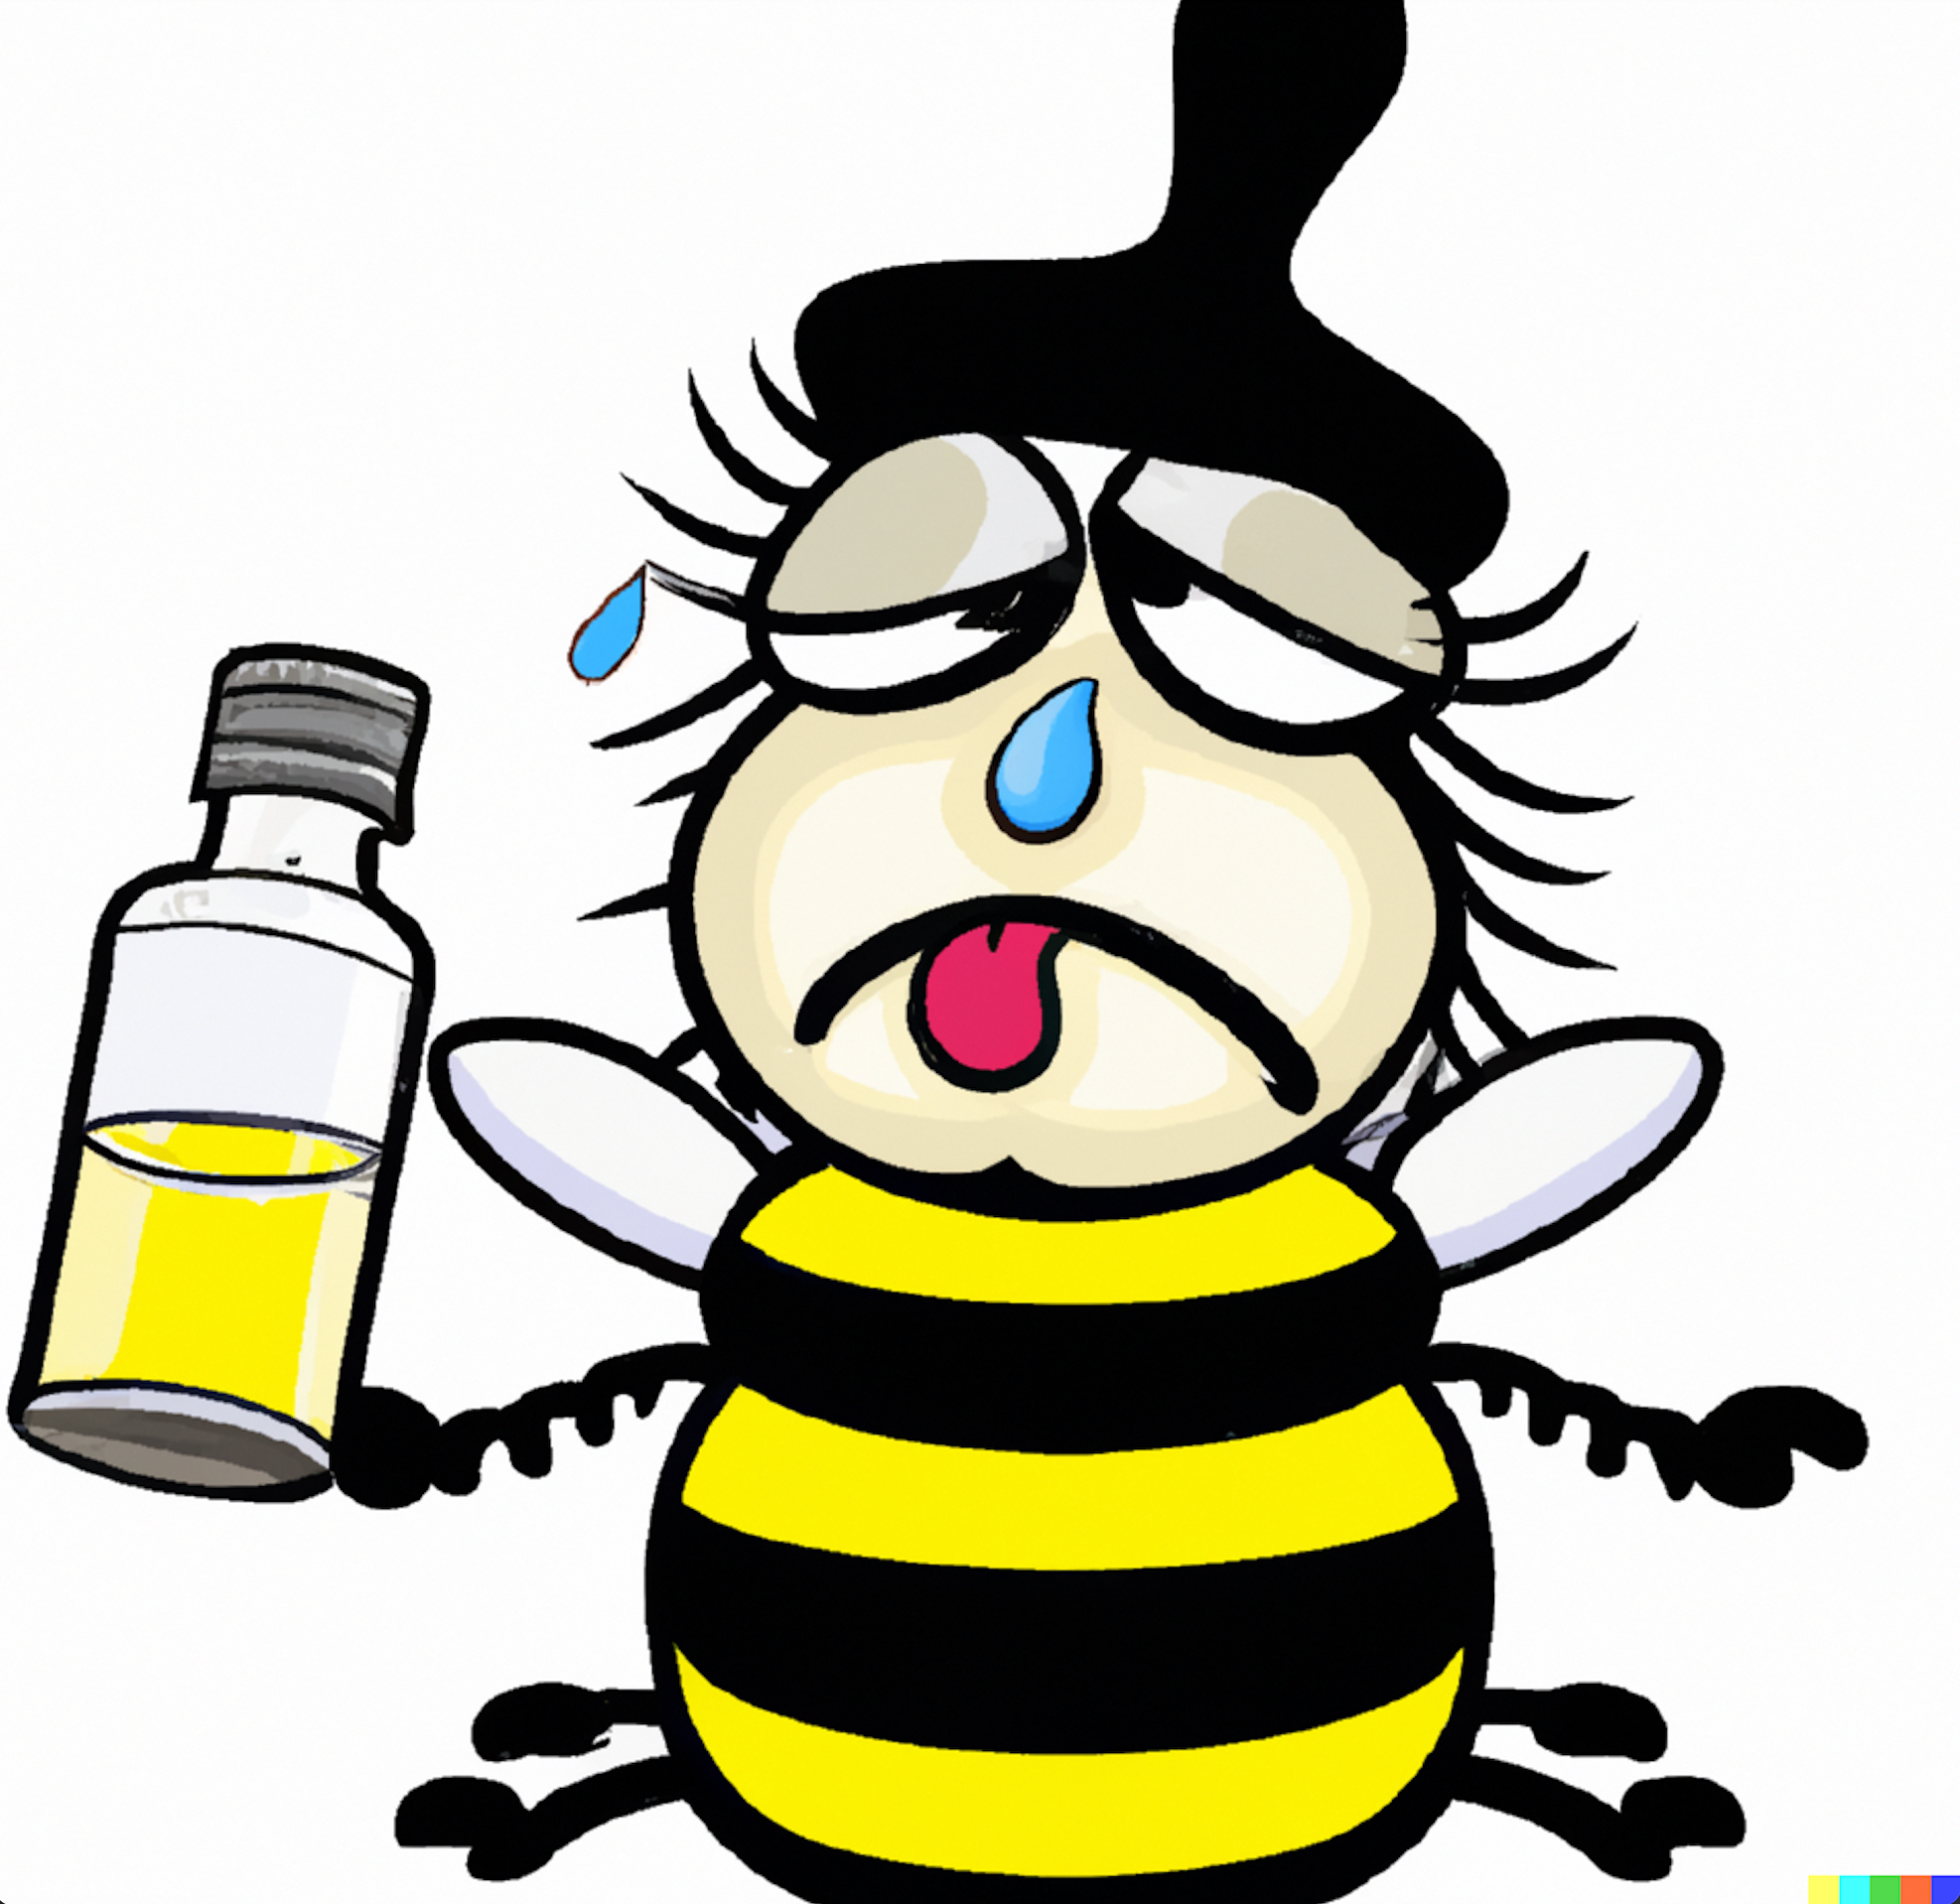 DALL-E image of a cartoon bee looking ill drinking a vial of a toxin